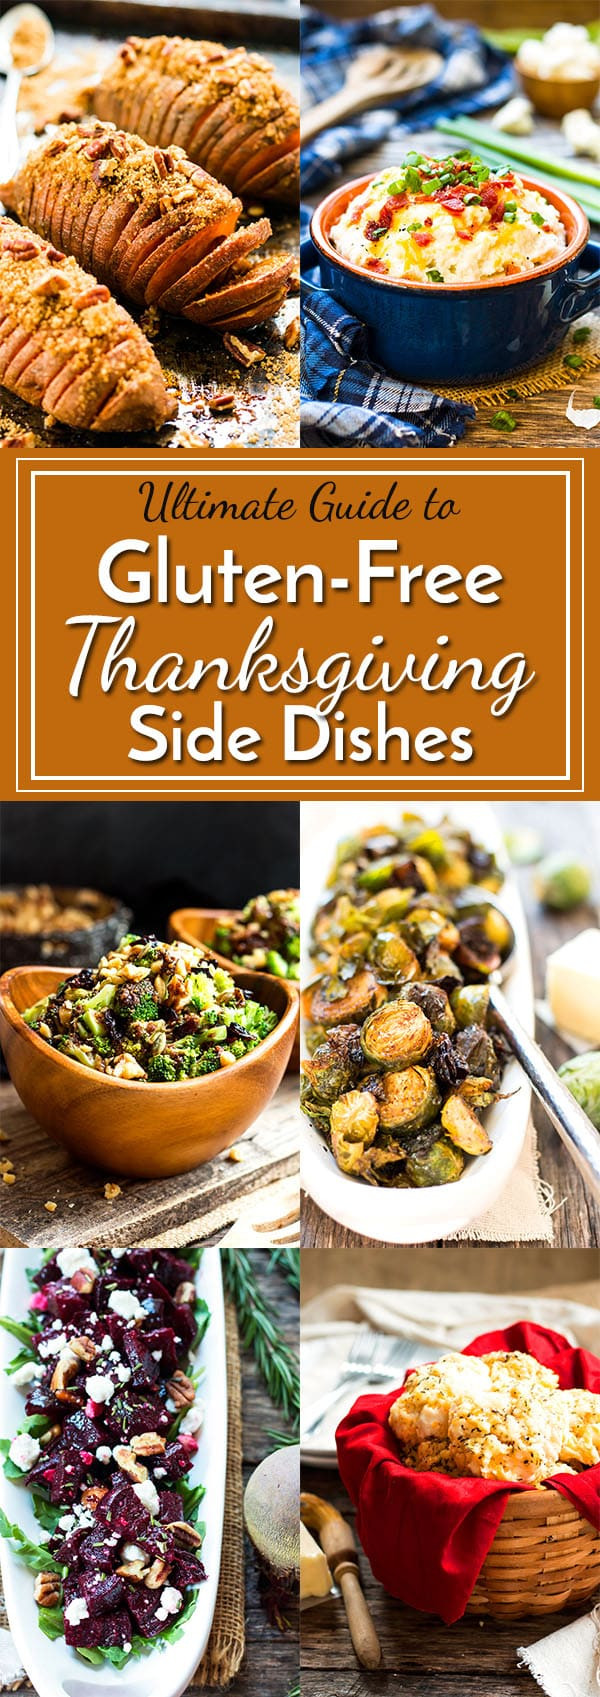 Gluten Free Thanksgiving Sides
 The Ultimate Guide to Gluten Free Thanksgiving Side Dishes